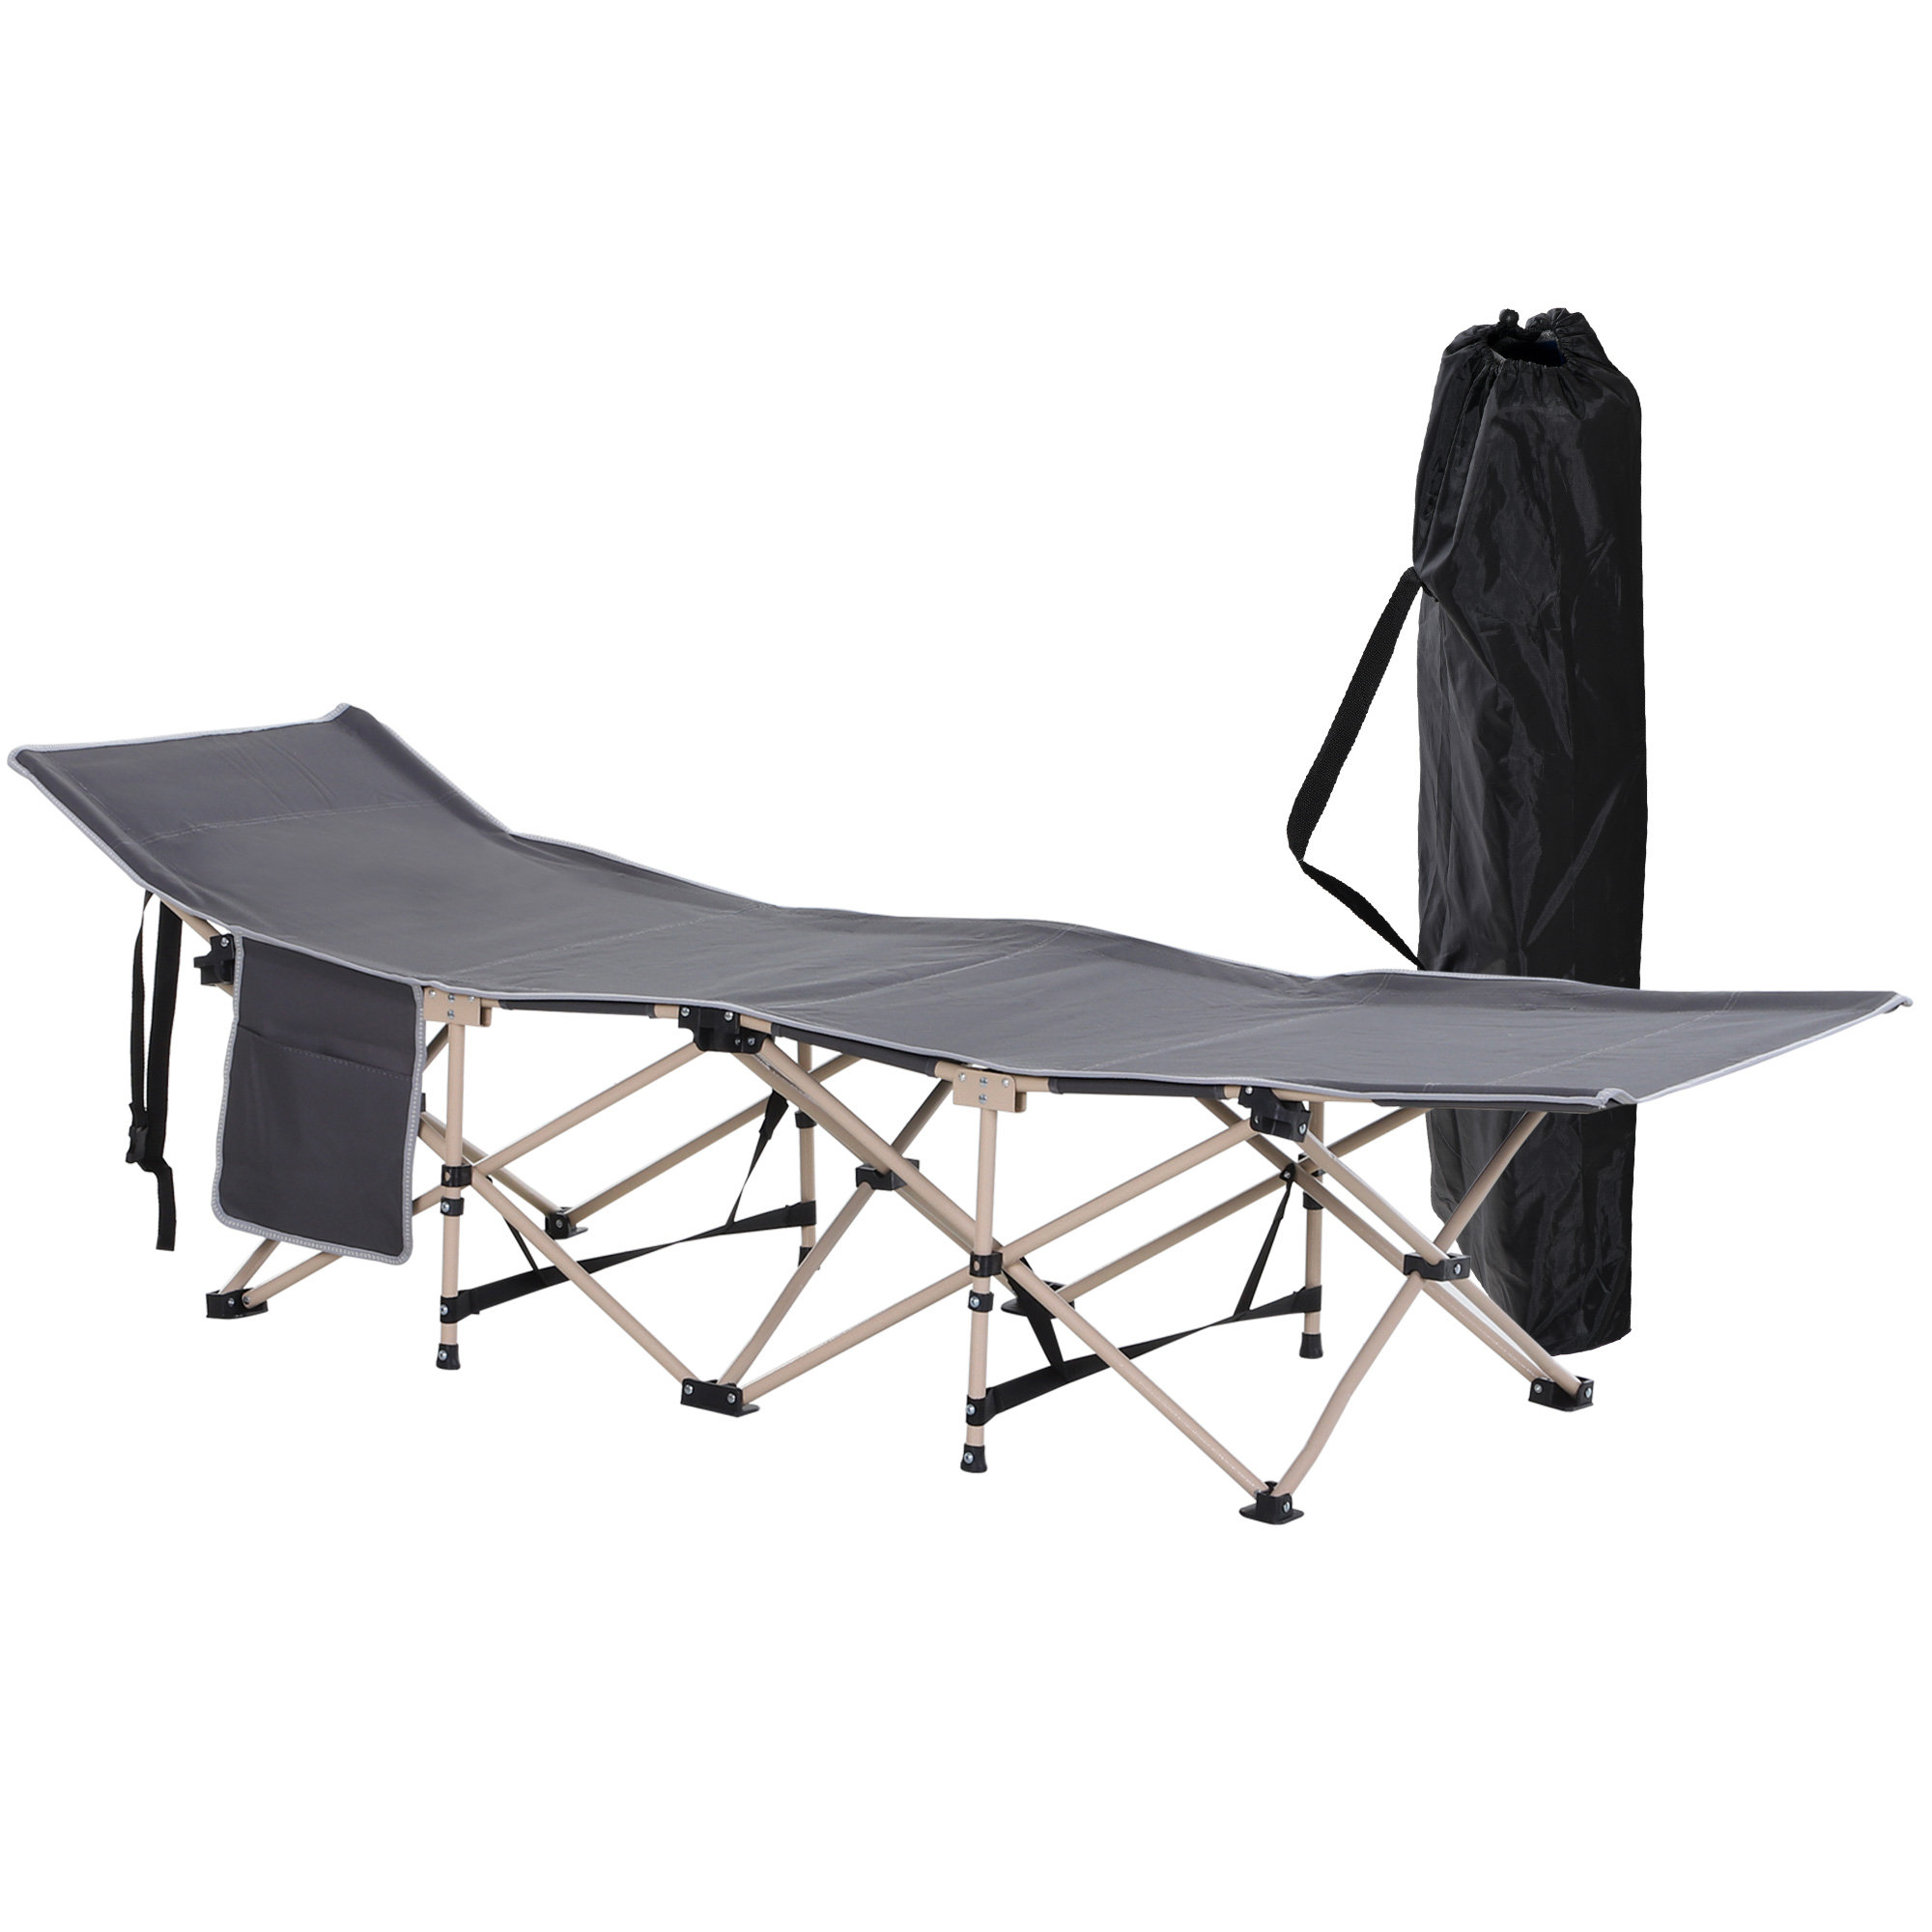 CLOCITYPLUS Portable Military Folding Camping Cot with Adult Tote Bag Black  1-Pack & Reviews